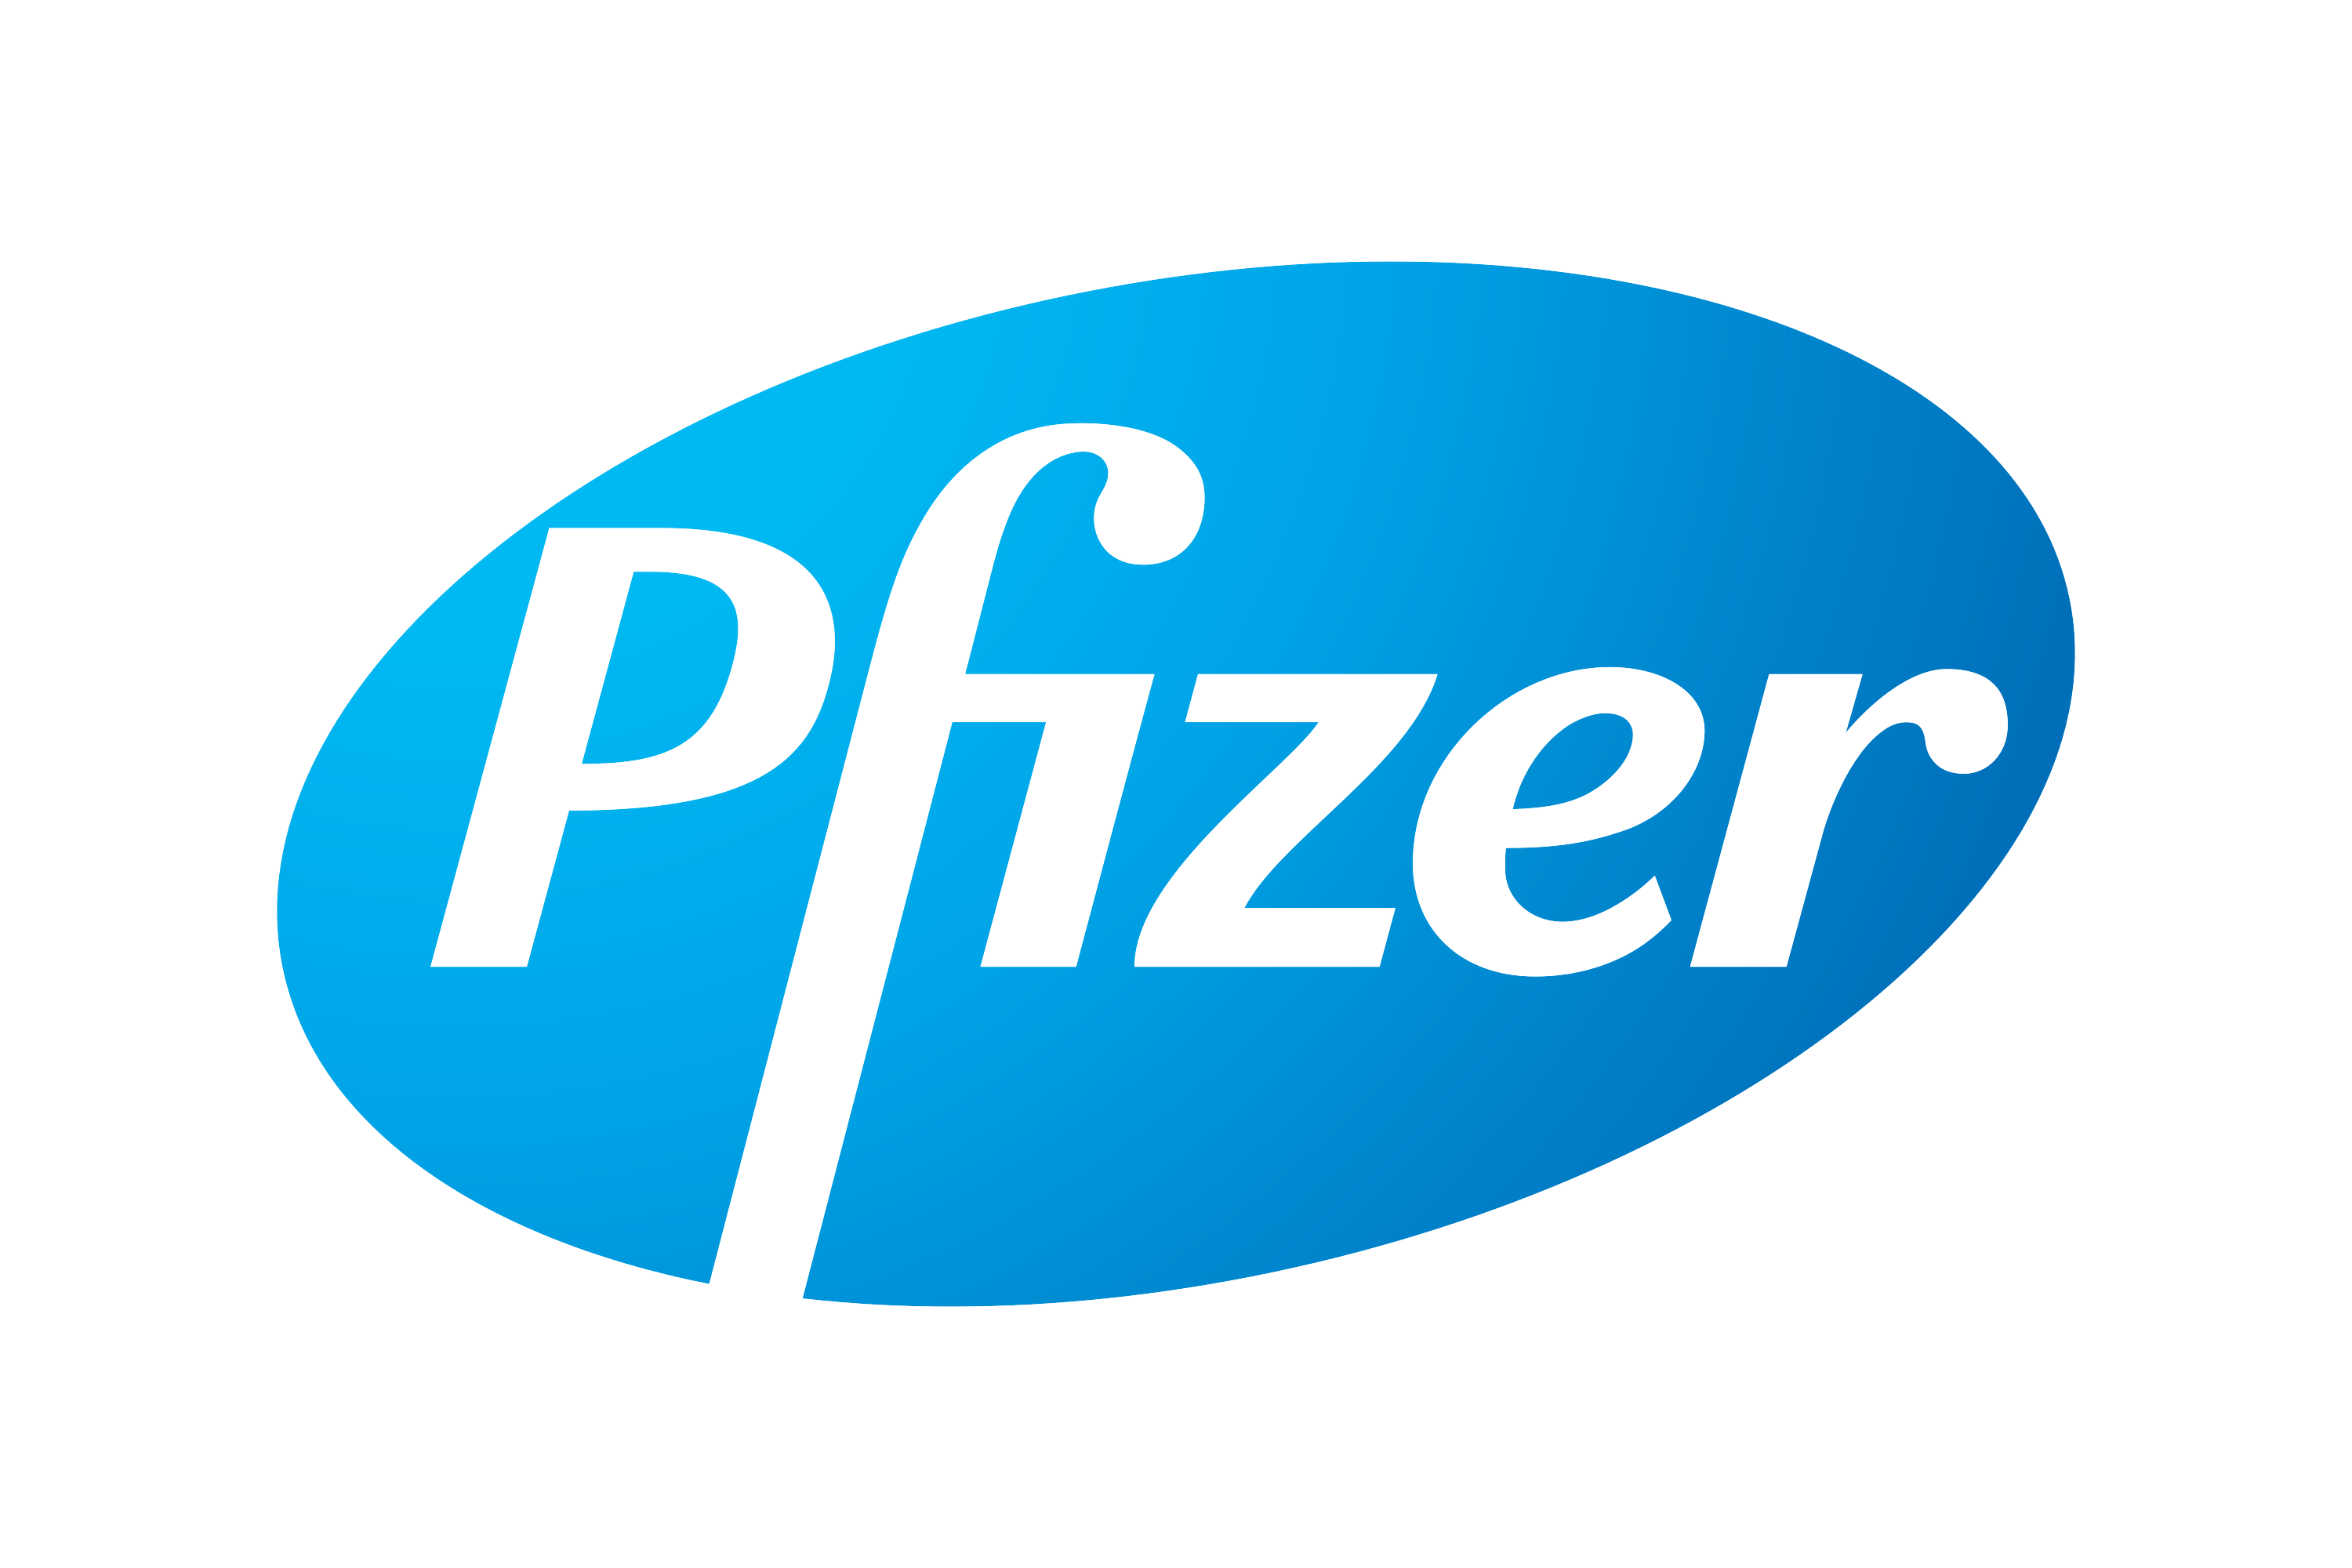 Pfizer, Novartis Are Among Overbought Healthcare Stocks: Are They Worth A Look?